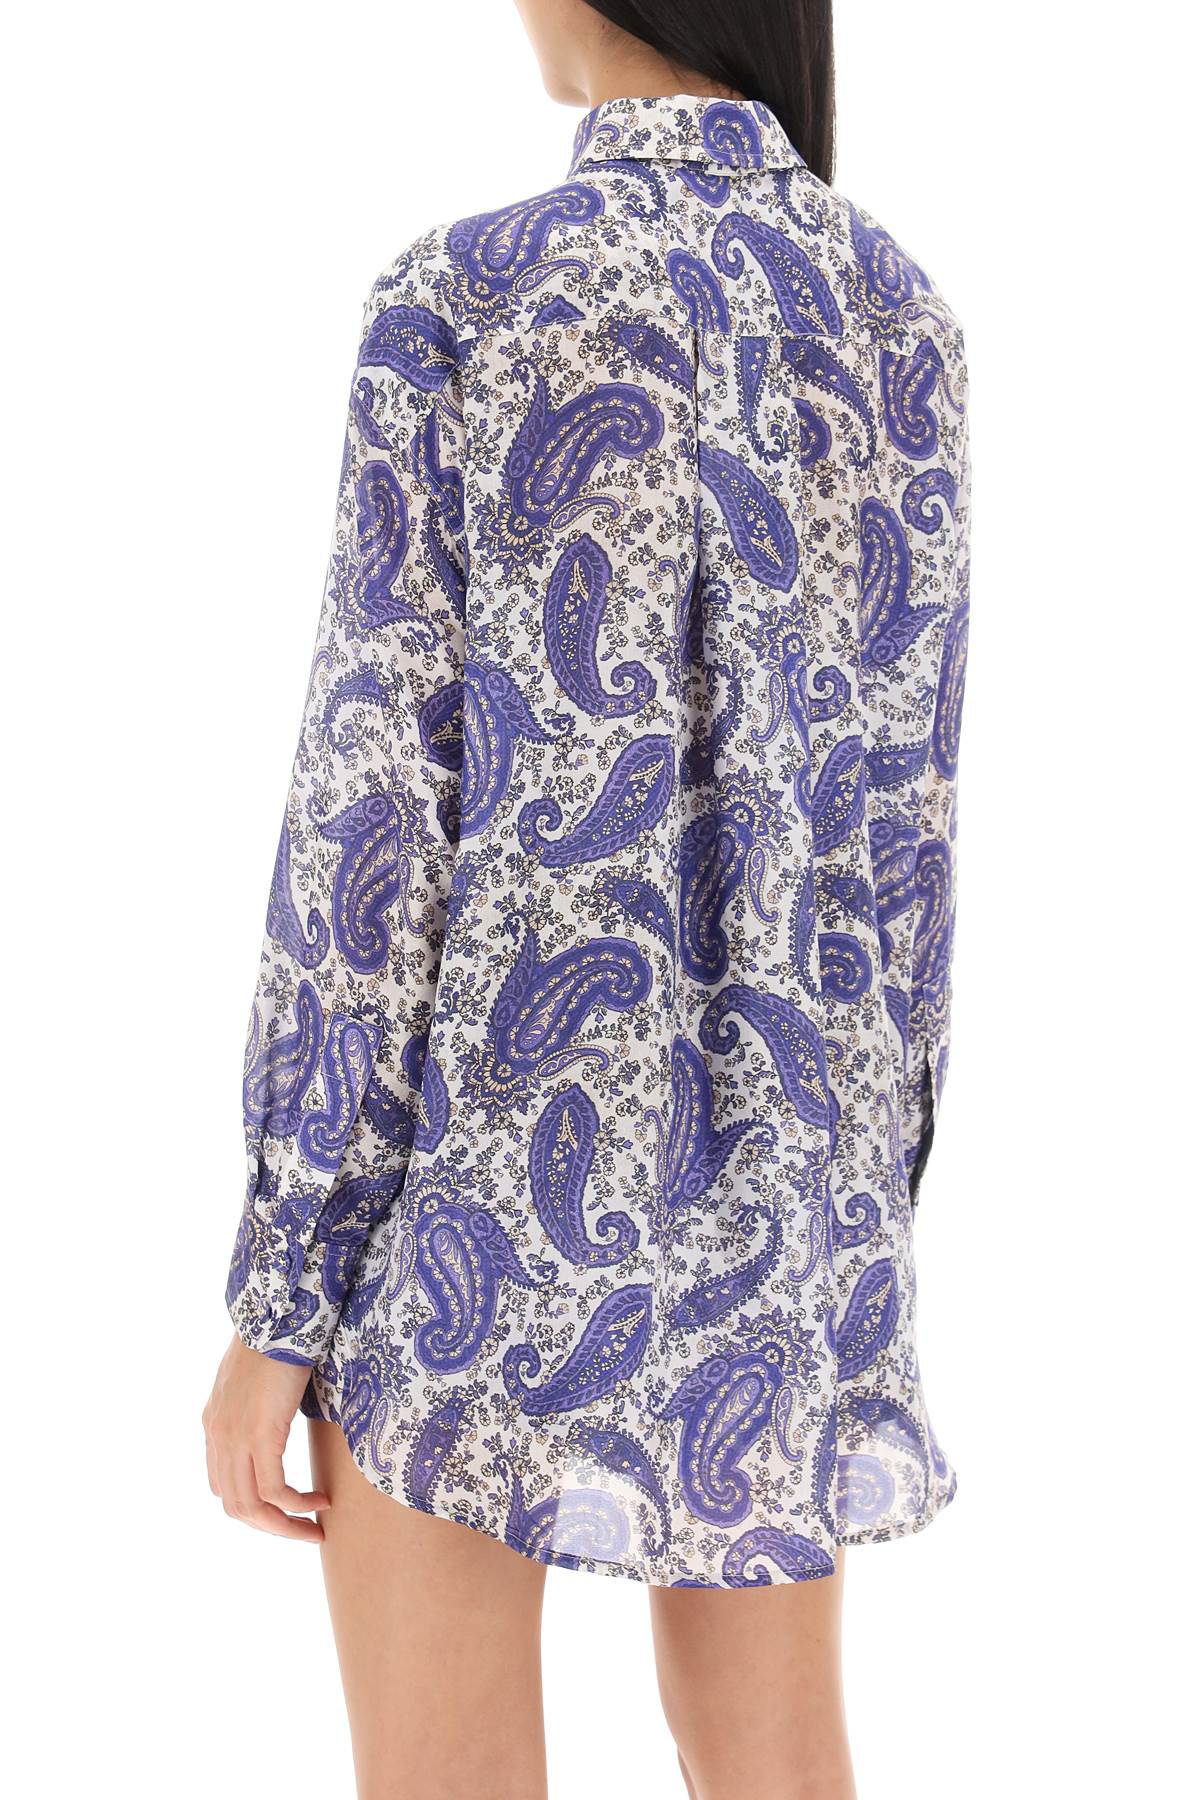 ZIMMERMANN Multicolor Paisley Print Silk Shirt for Women - FW23 Collection